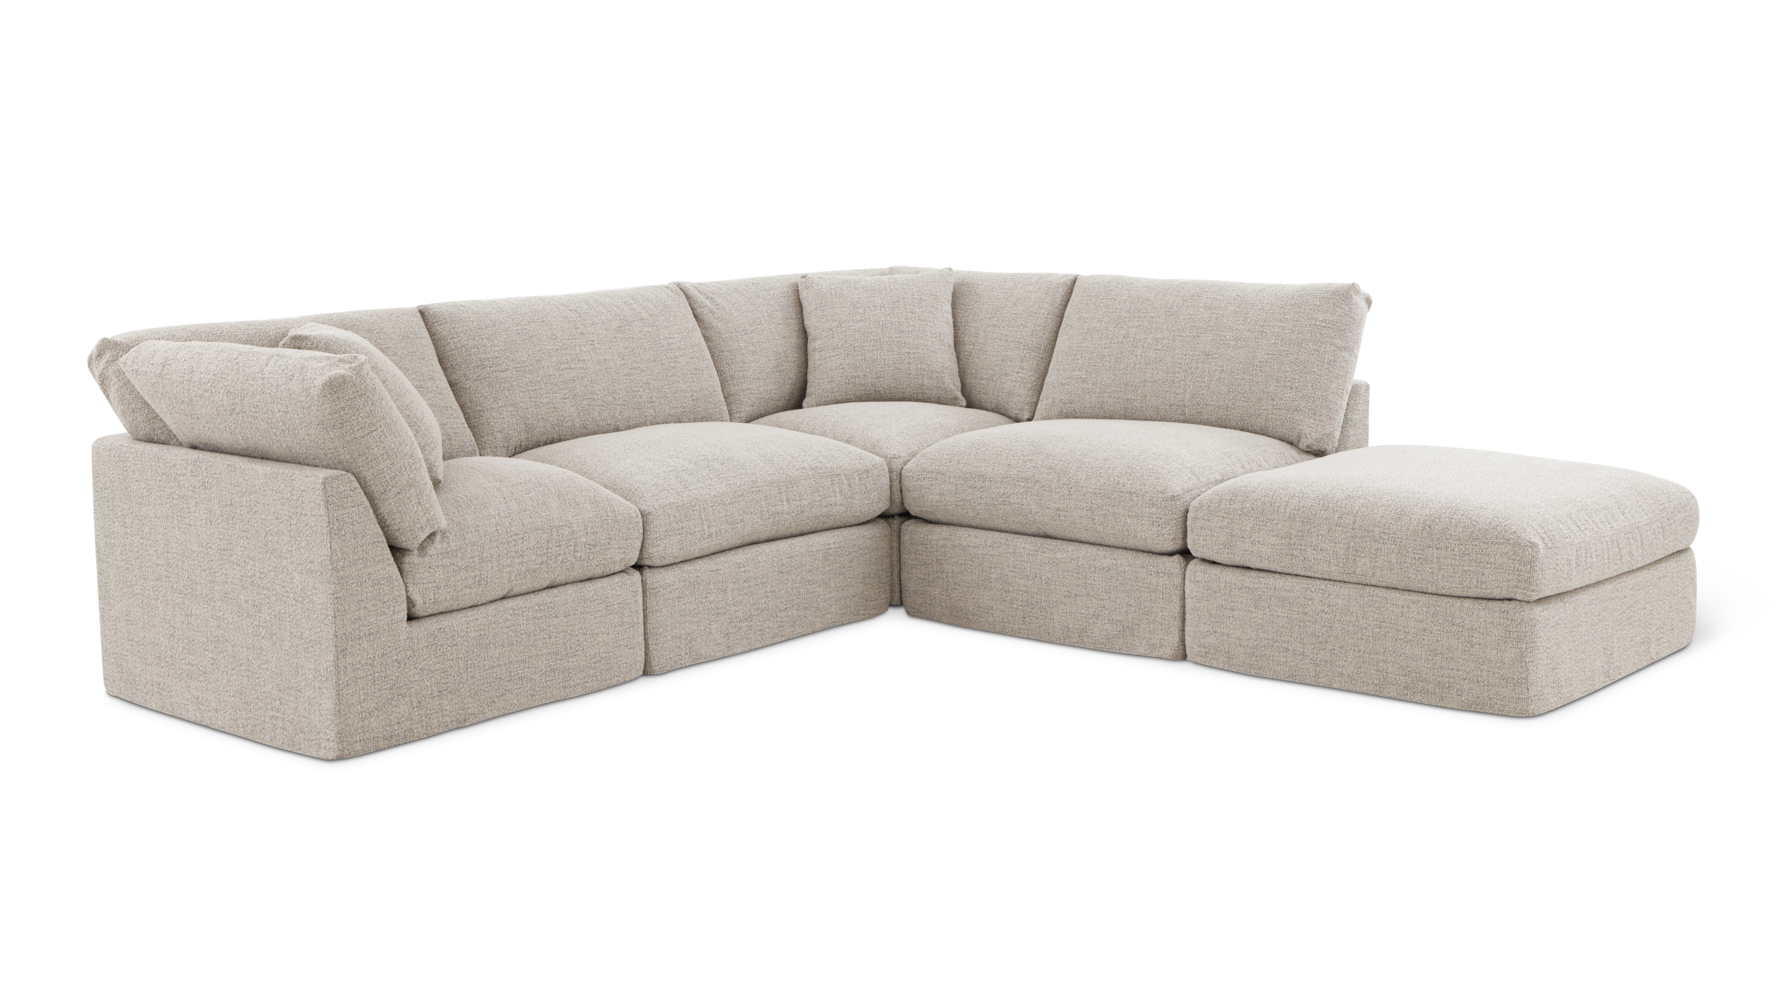 Get Together™ 5-Piece Modular Sectional, Standard, Oatmeal - Image 5